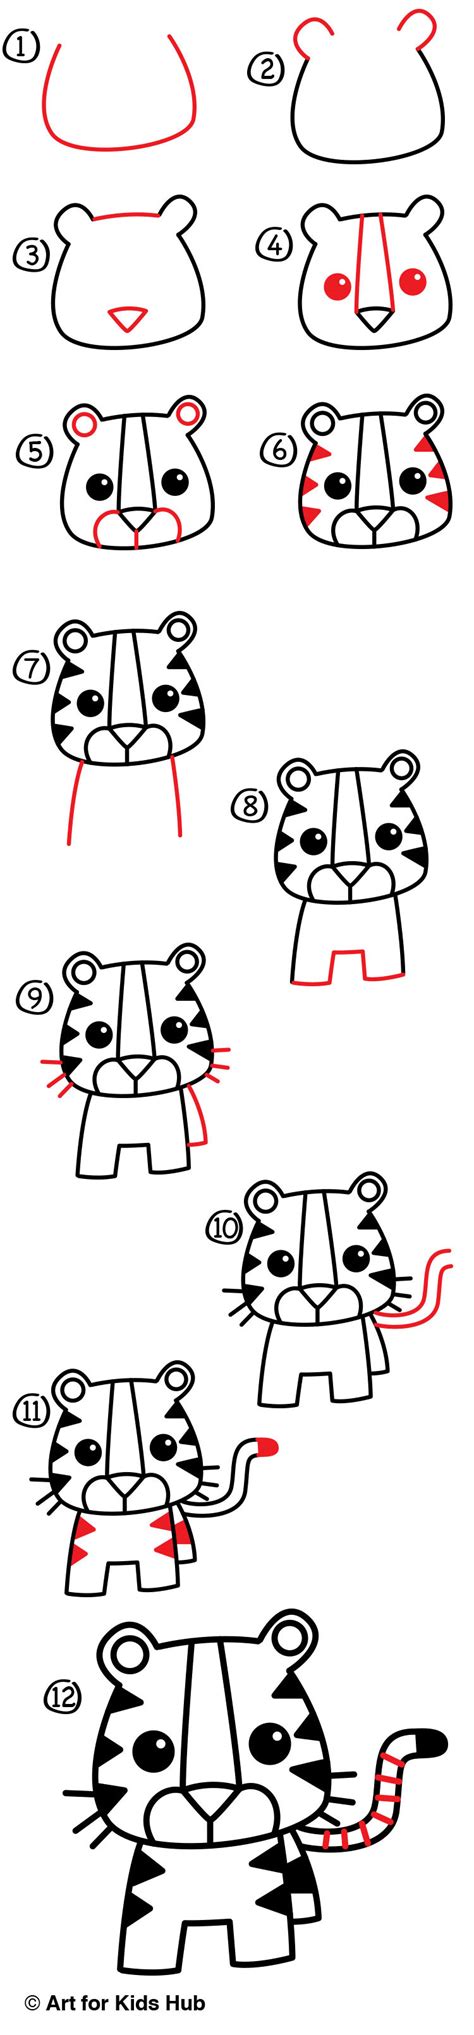 How To Draw A Cartoon Tiger Art For Kids Hub